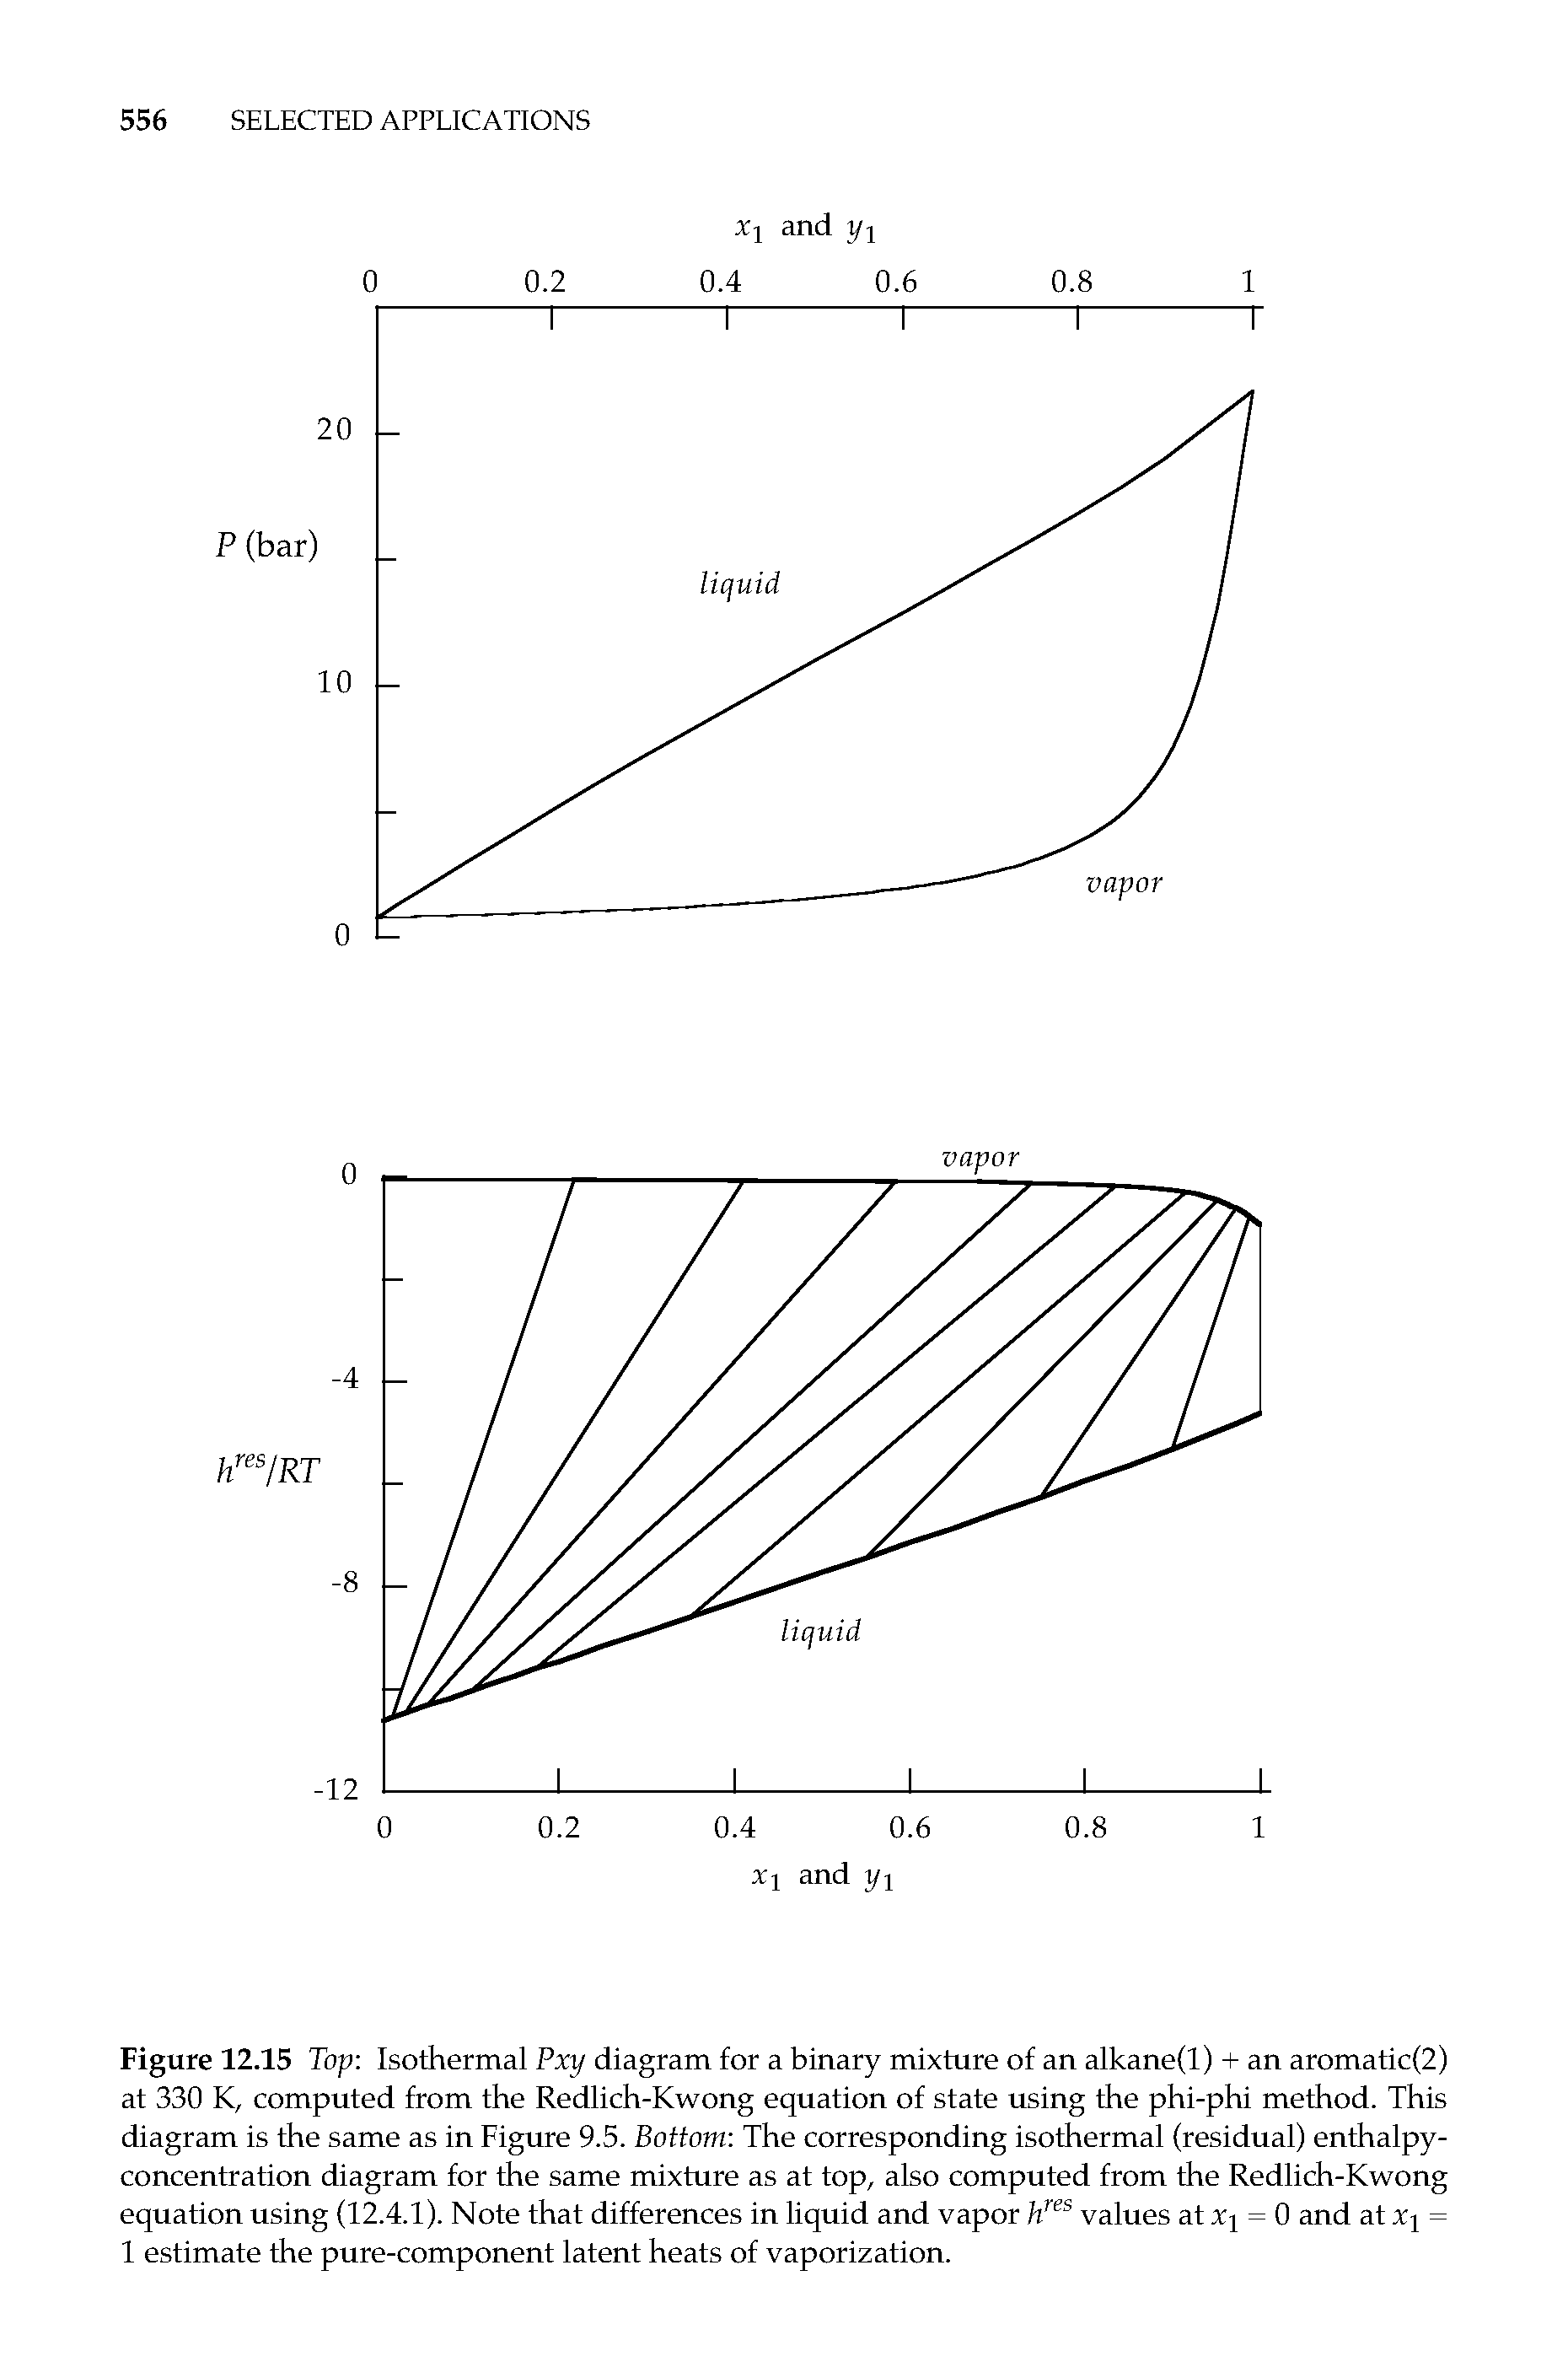 Figure 12.15 Top Isothermal Pxy diagram for a binary mixture of an alkane(l) + an aromatic(2) at 330 K, computed from the Redlich-Kwong equation of state using the phi-phi method. This diagram is the same as in Figure 9.5. Bottom The corresponding isothermal (residual) enthalpy-concentration diagram for the same mixture as at top, also computed from the Redlich-Kwong equation using (12.4.1). Note that differences in liquid and vapor values at Xi = 0 and at Xi = 1 estimate the pure-component latent heats of vaporization.